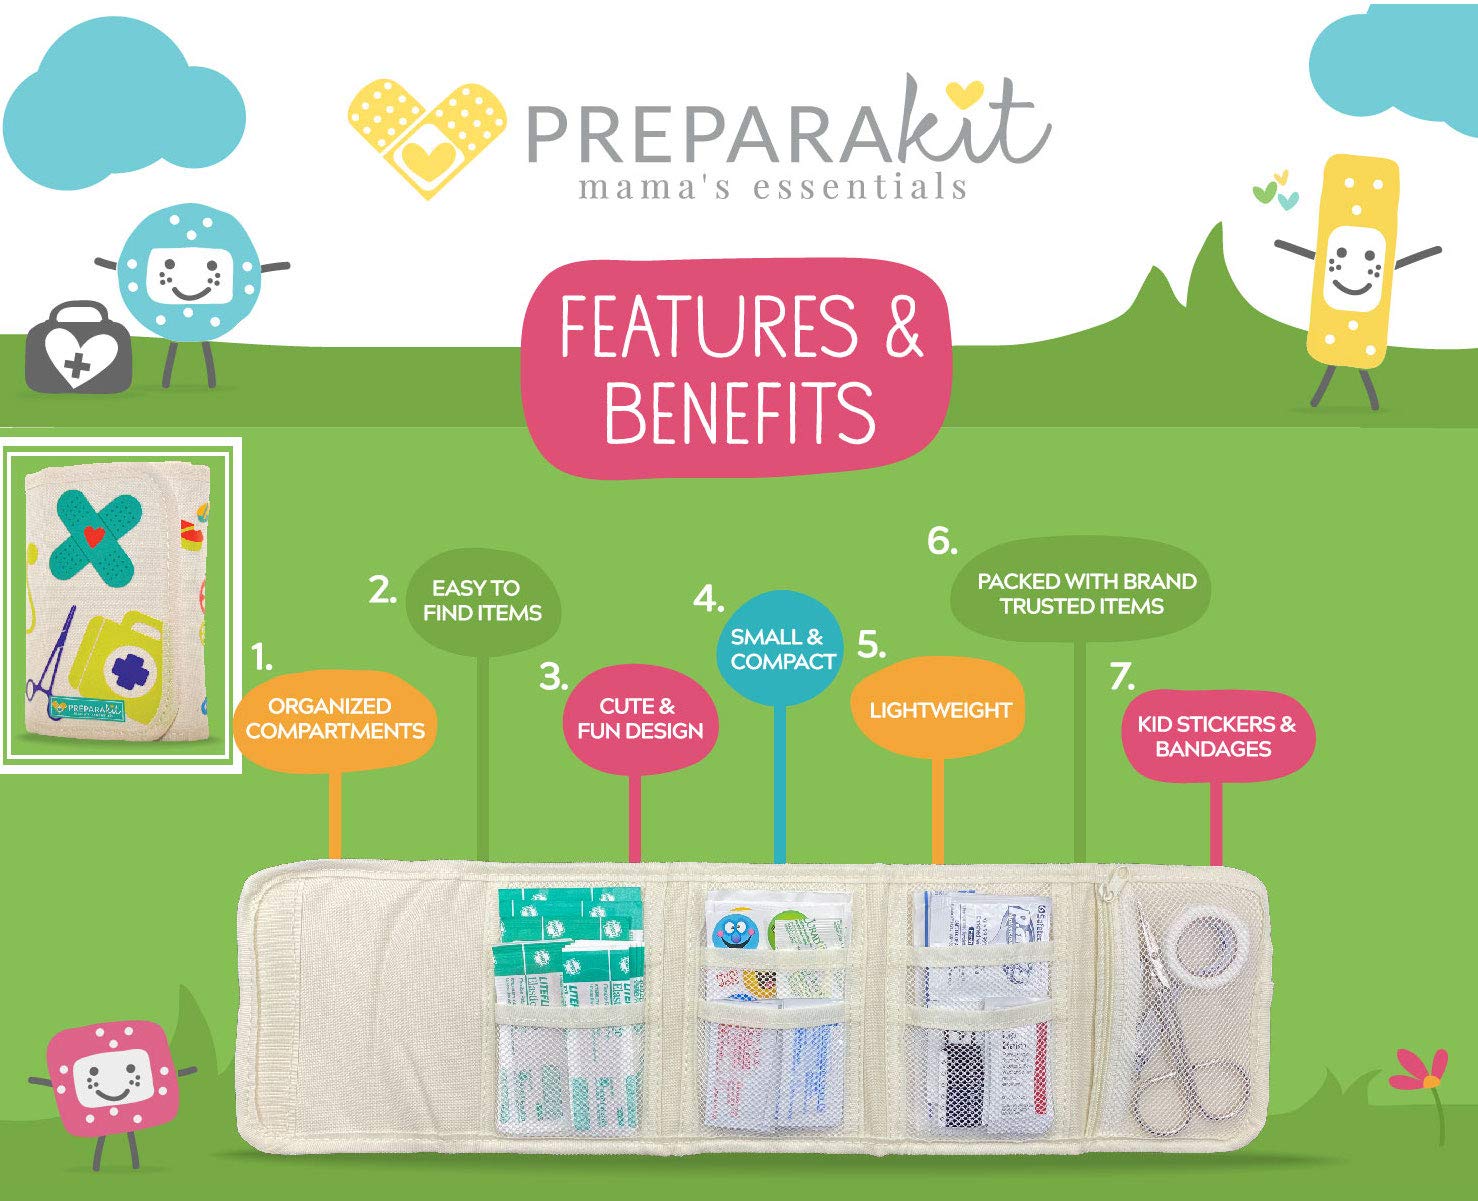 PreparaKit Travel First Aid Kit for Kids - Mini First Aid Kit for Car, Purse, Backpack, or Diaper Bag - 50 Piece Travel Medicine Kit Includes All Essential Medical Supplies - TSA-Approved (Kid Joy)